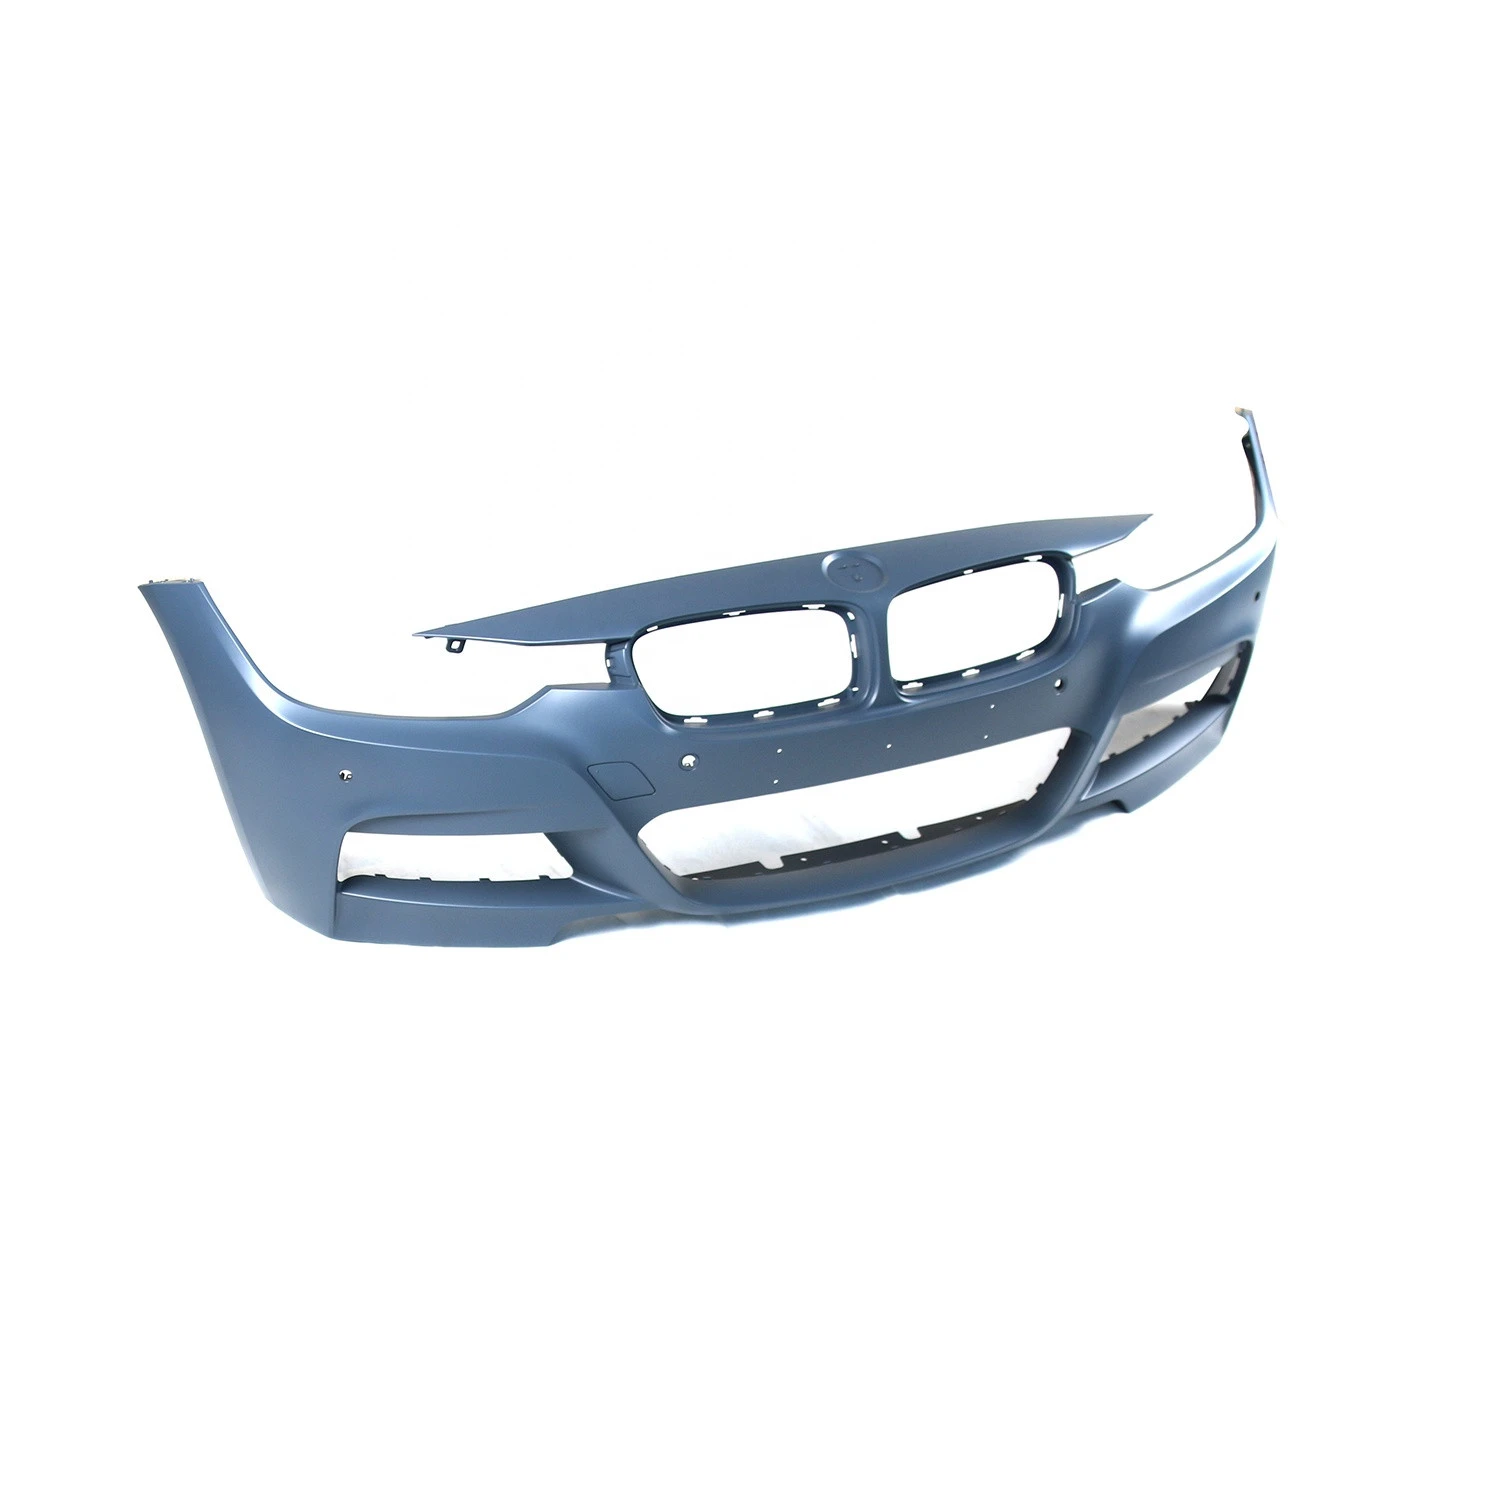 Aftermarket Quality F35 LCI Car Bumper Parts for BMW Body Kit Front Bumper for BMW 3Series F35 LCI OEM 5111-7429-322